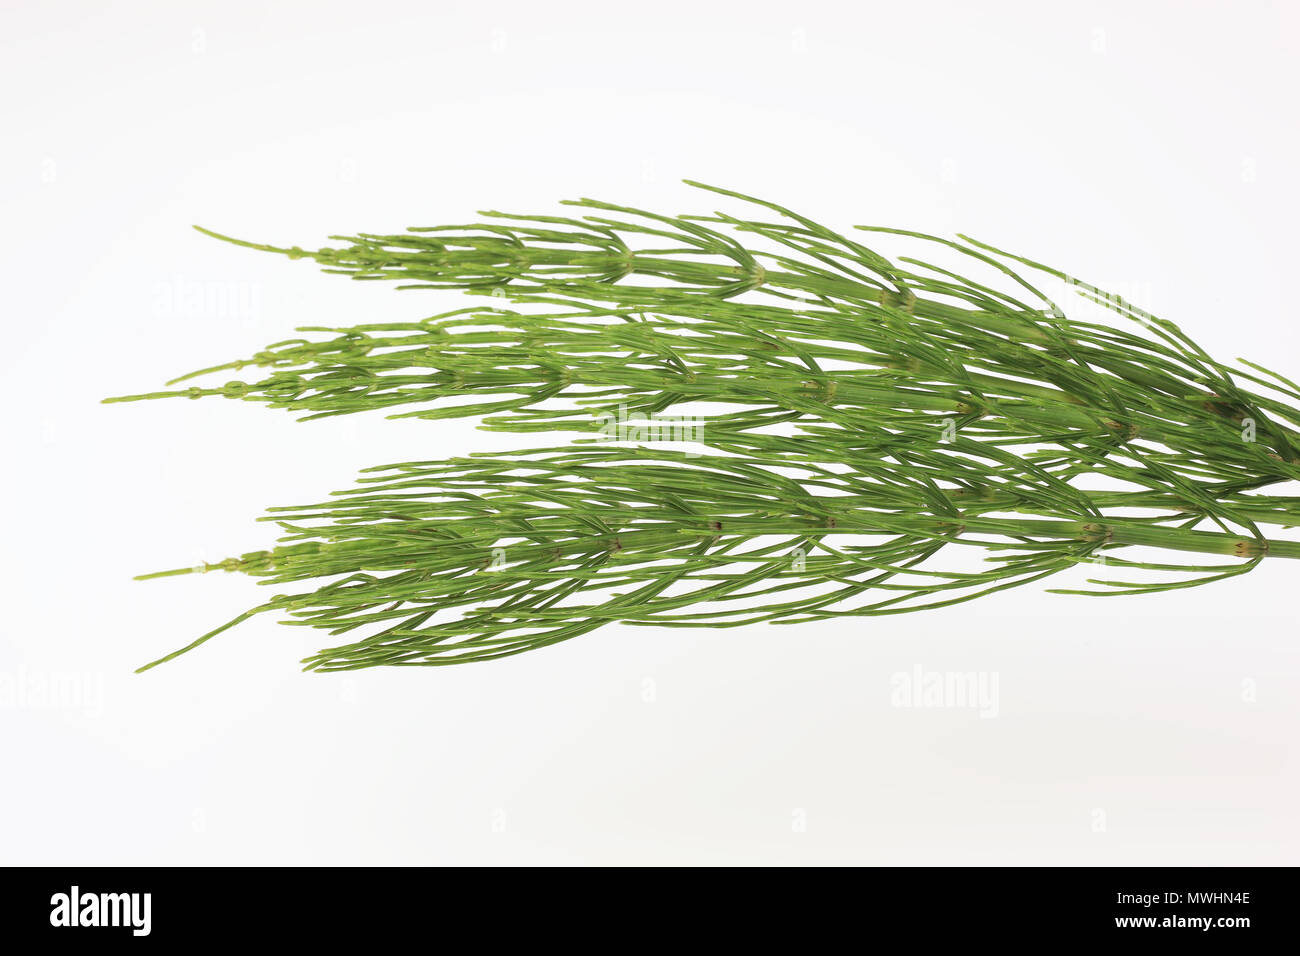 Medicinal plant, Equisetum arvense, the field horsetail or common horsetail Stock Photo